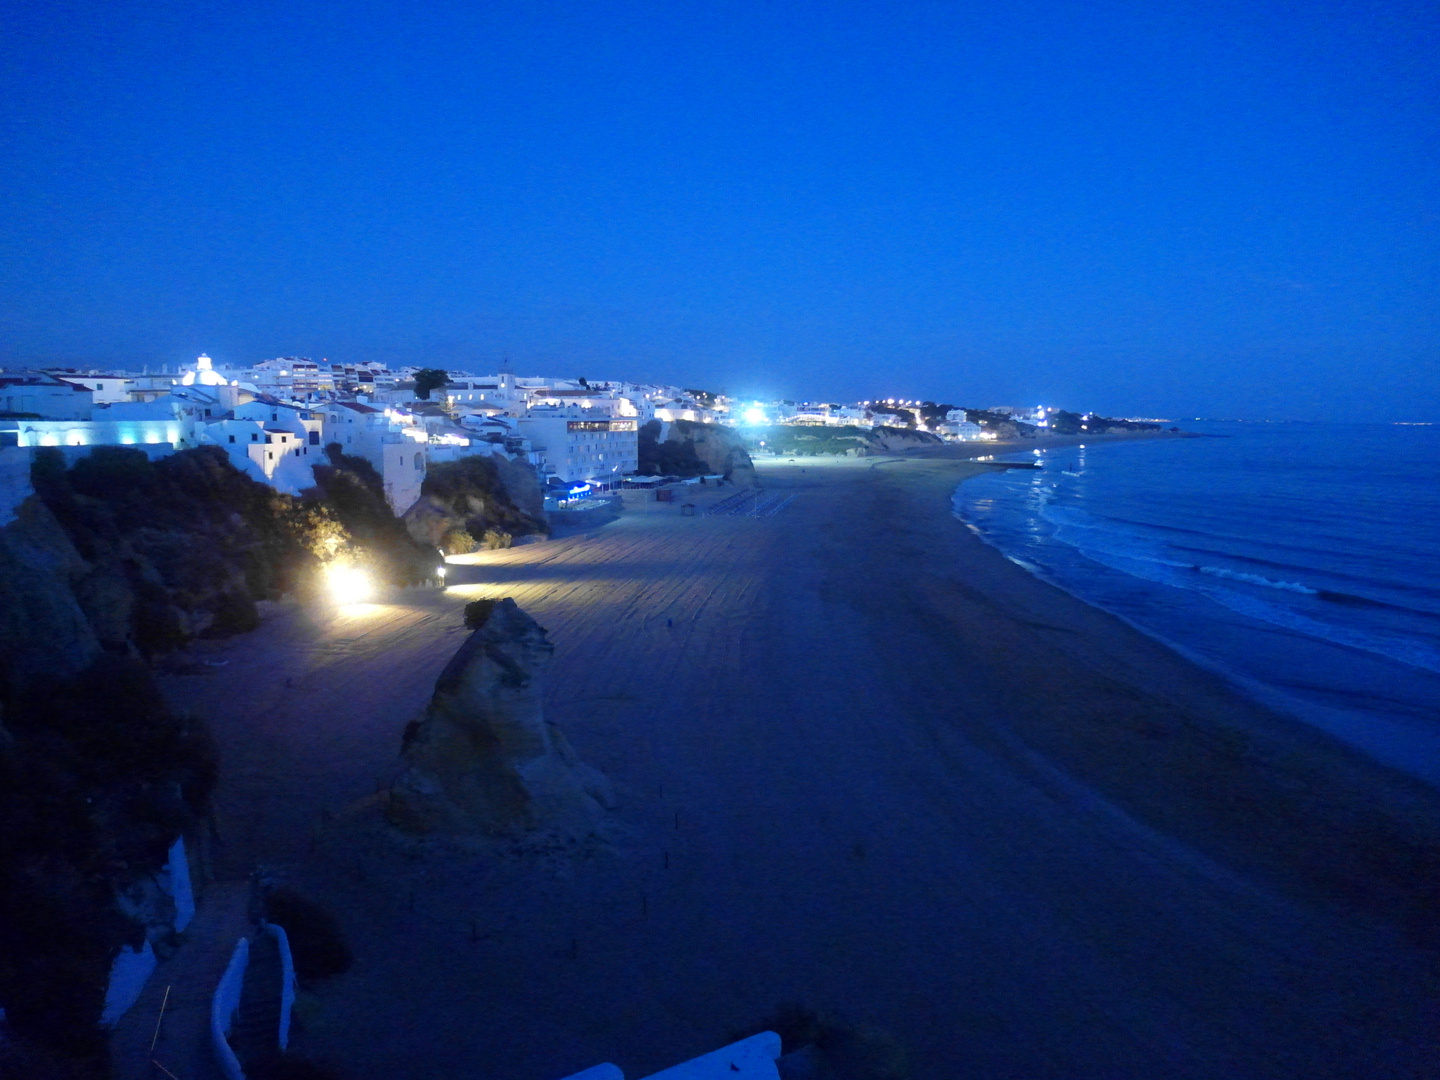 Abends in Albufeira, Portugal